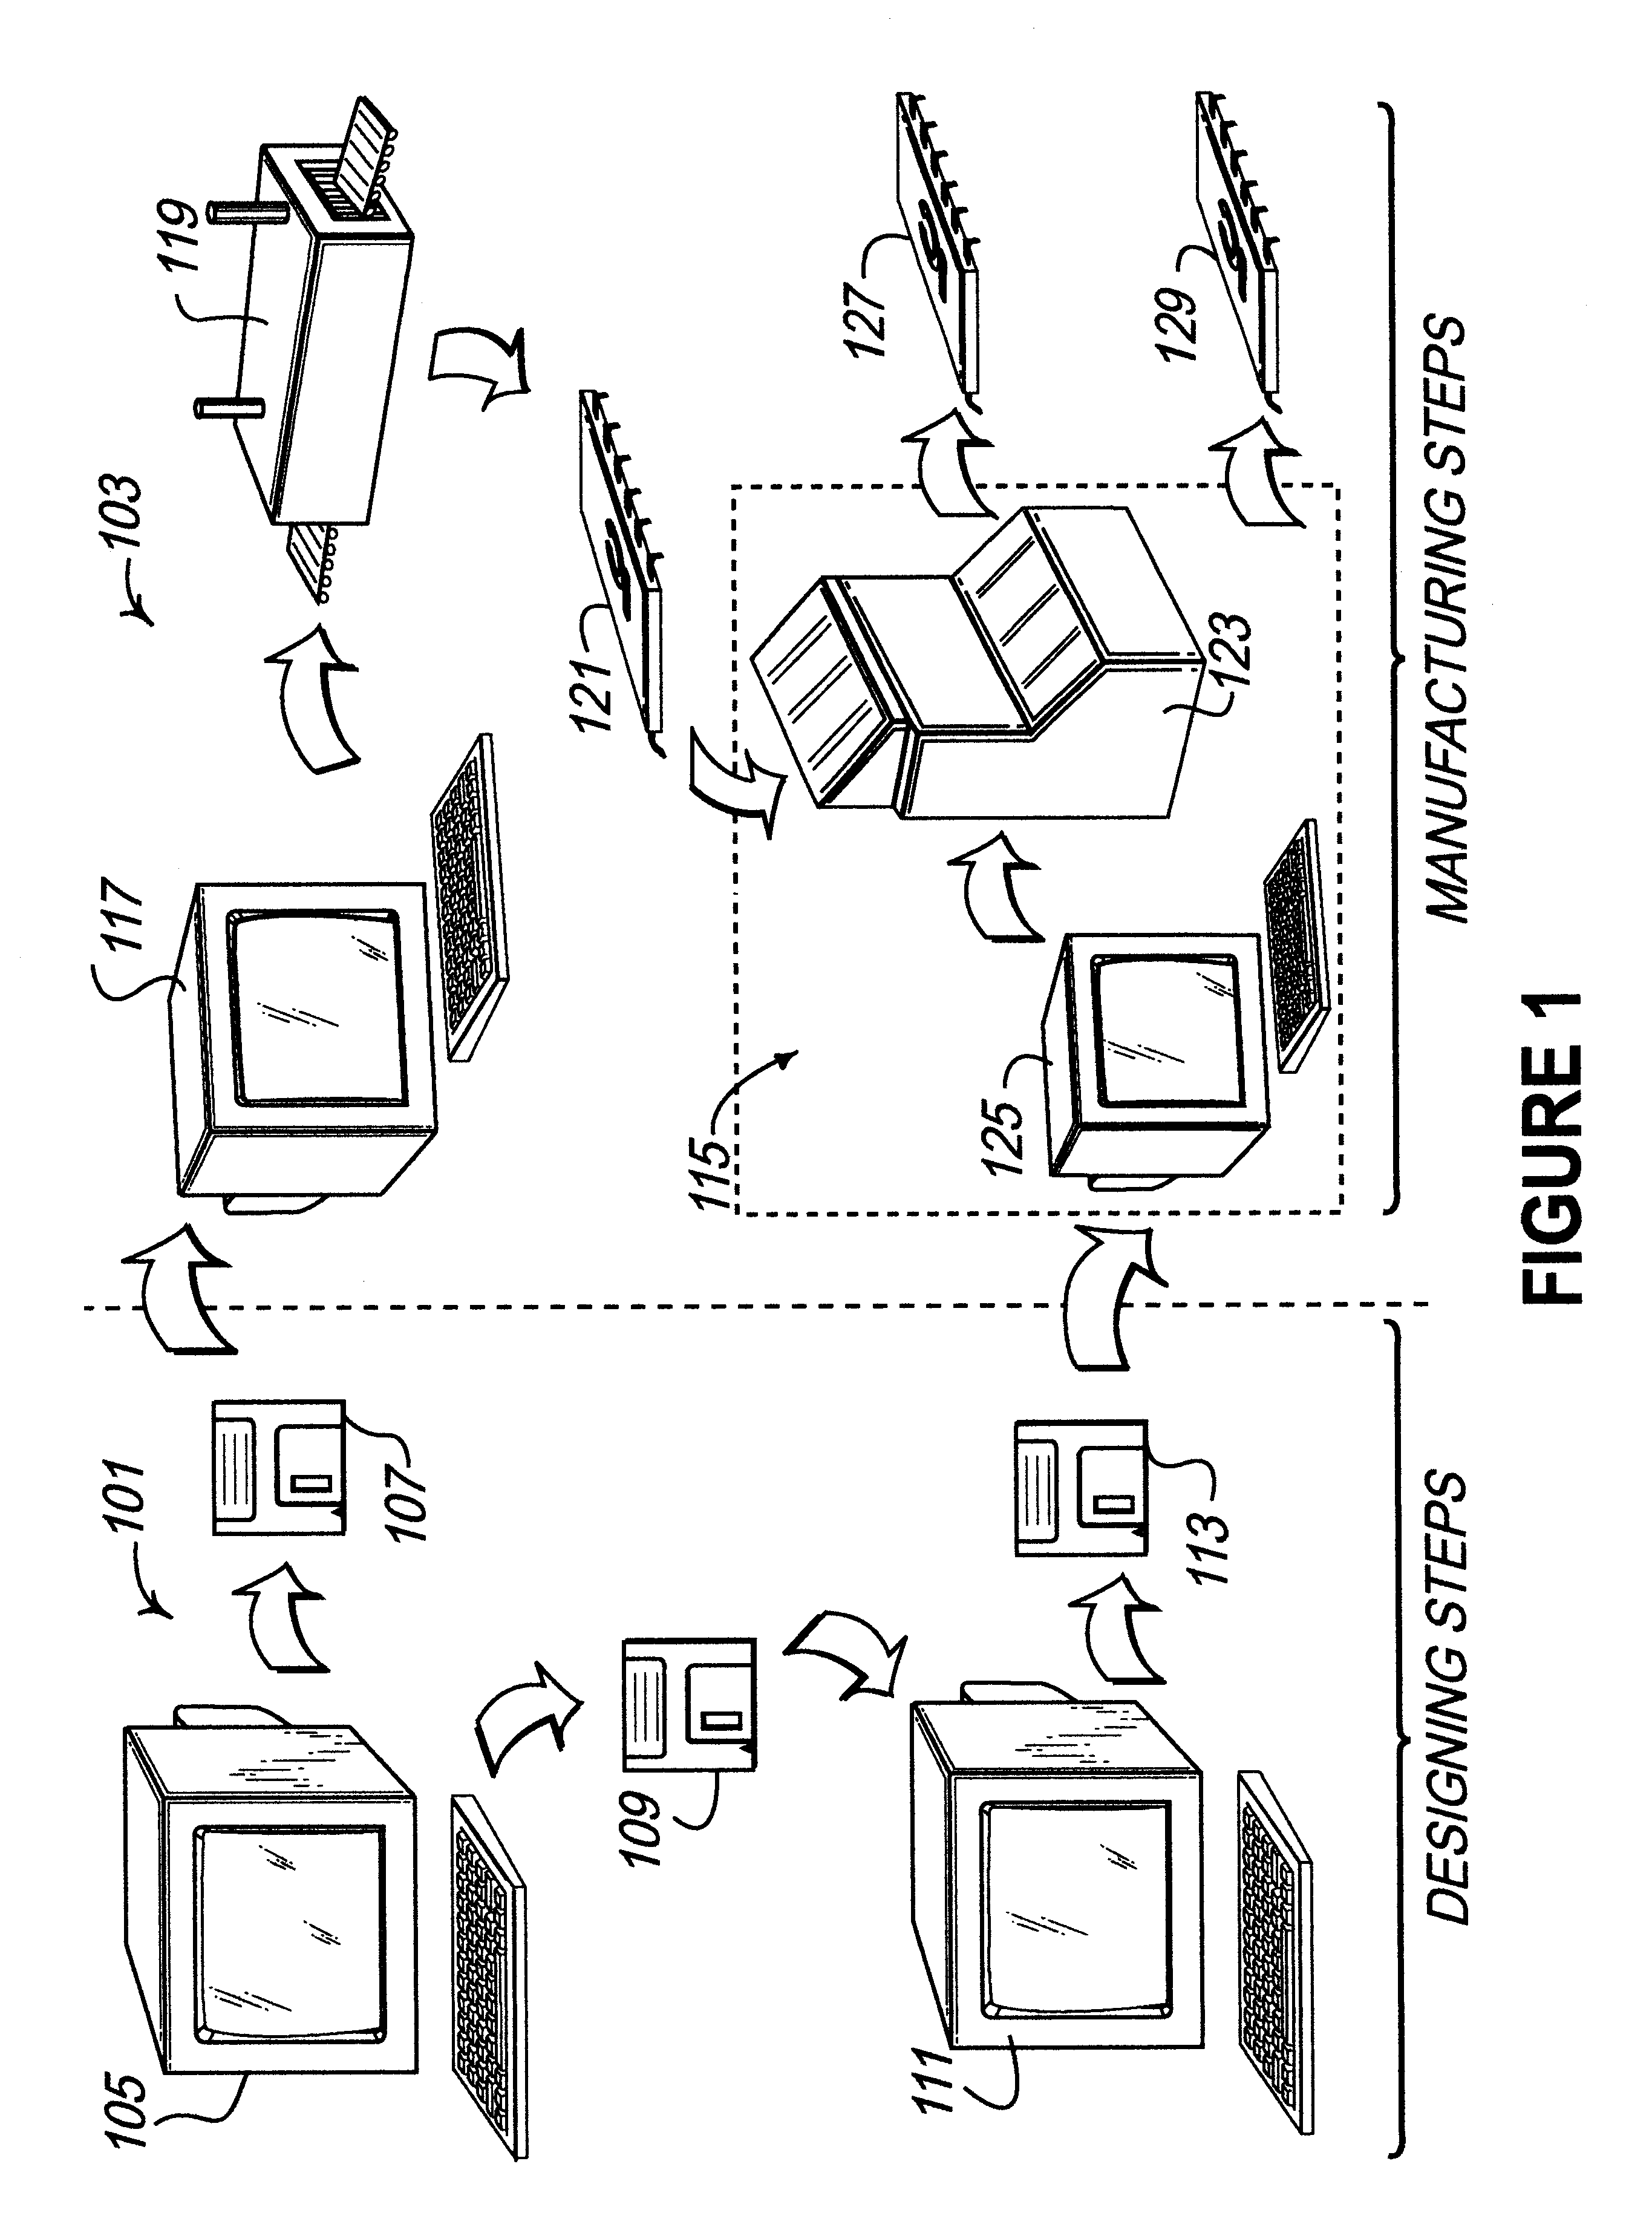 File driven mask insertion for automatic test equipment test pattern generation